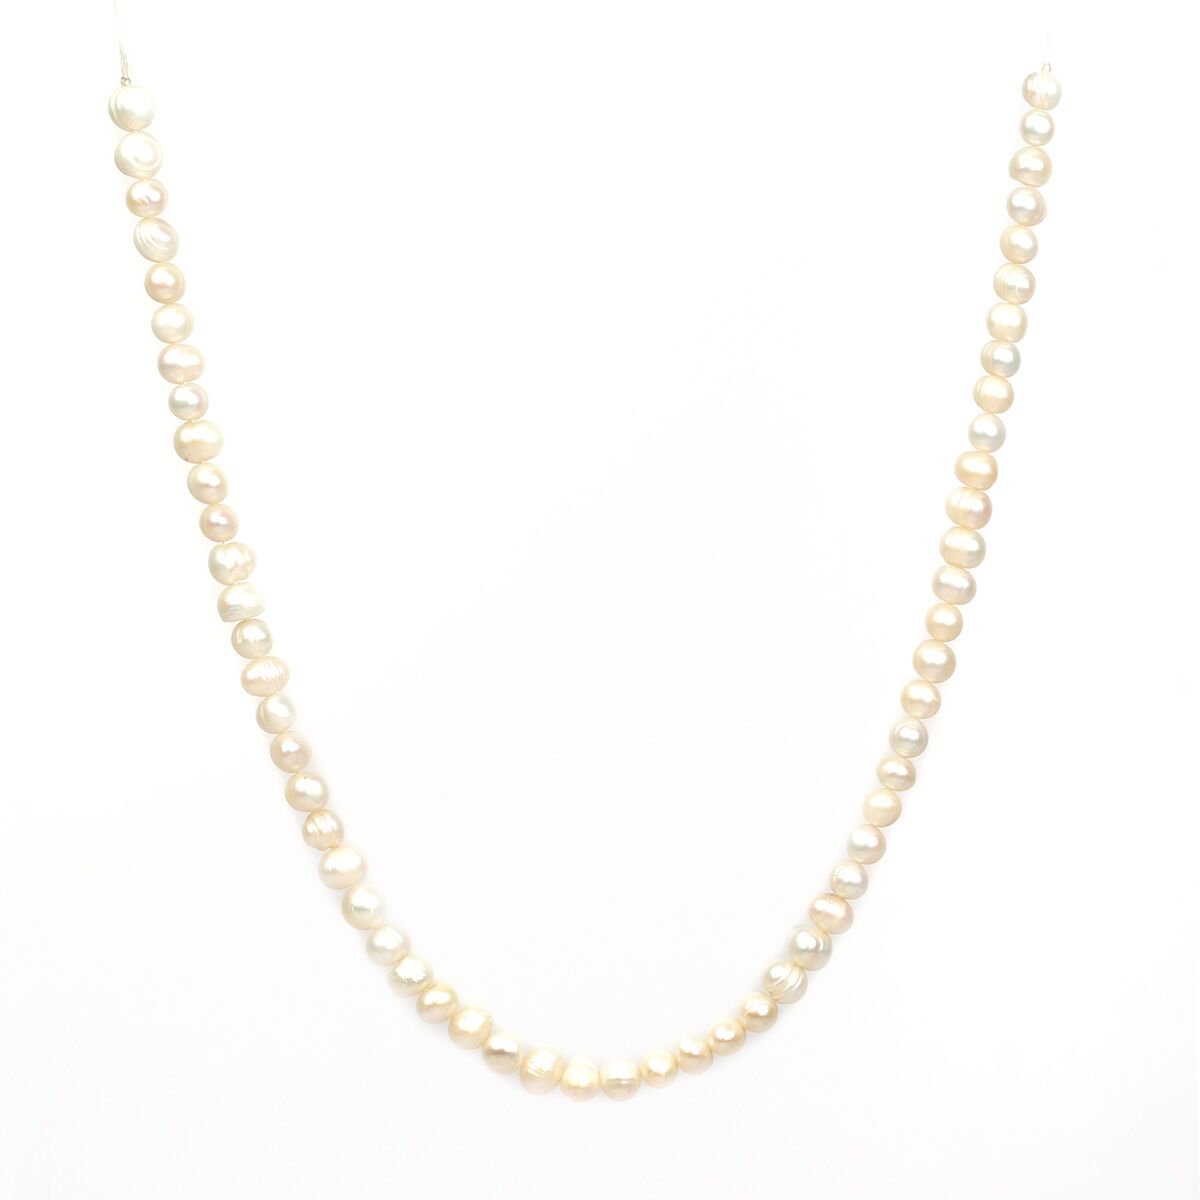 White Pearl Female Necklace | Natural Stone Made Necklace 